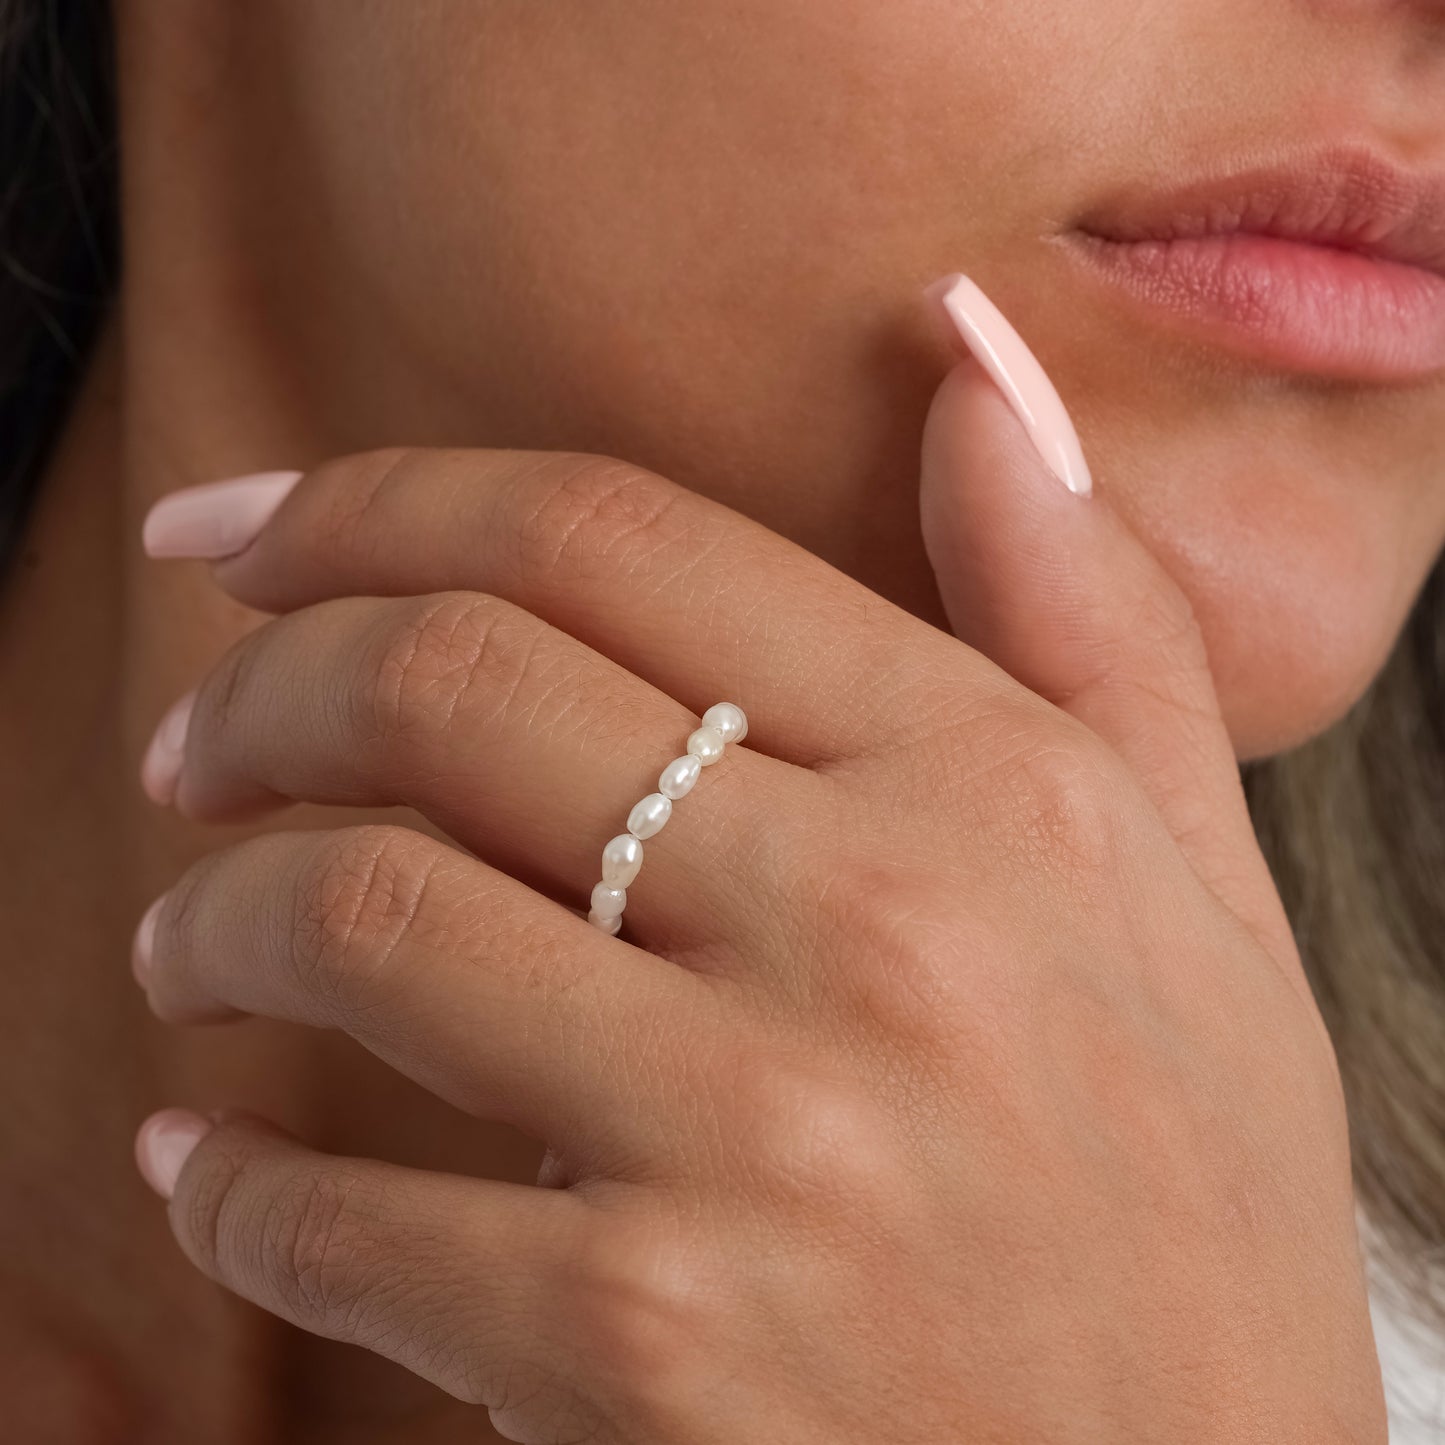 A model in a white sleeveless top wearing Freshwater Pearl ring on her finger. Close-up image of the ring.